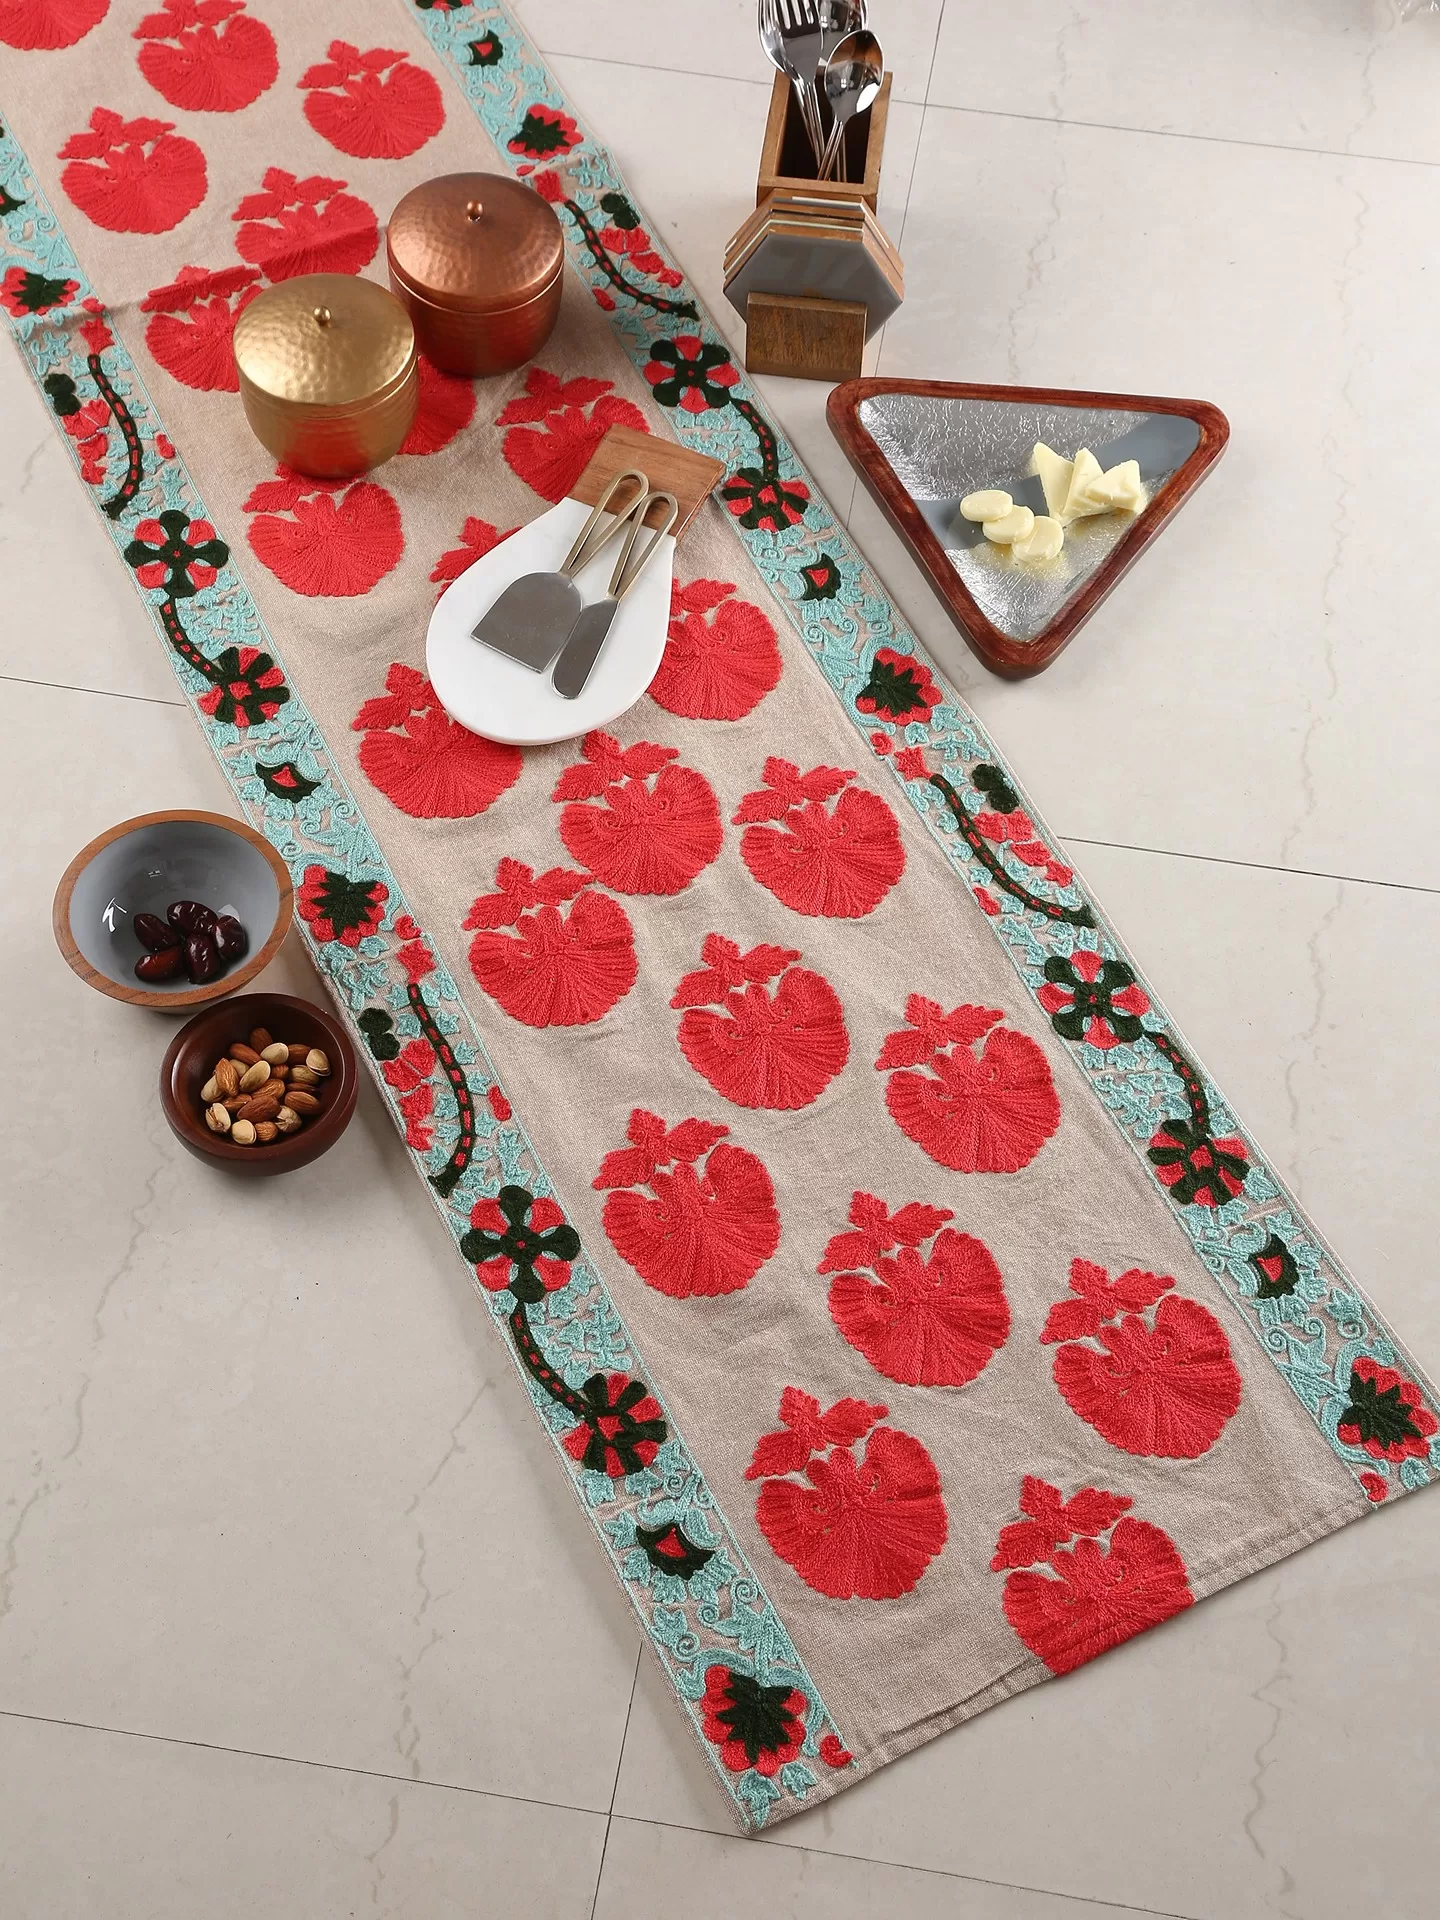 Moghul design table runner - Amoliconcepts